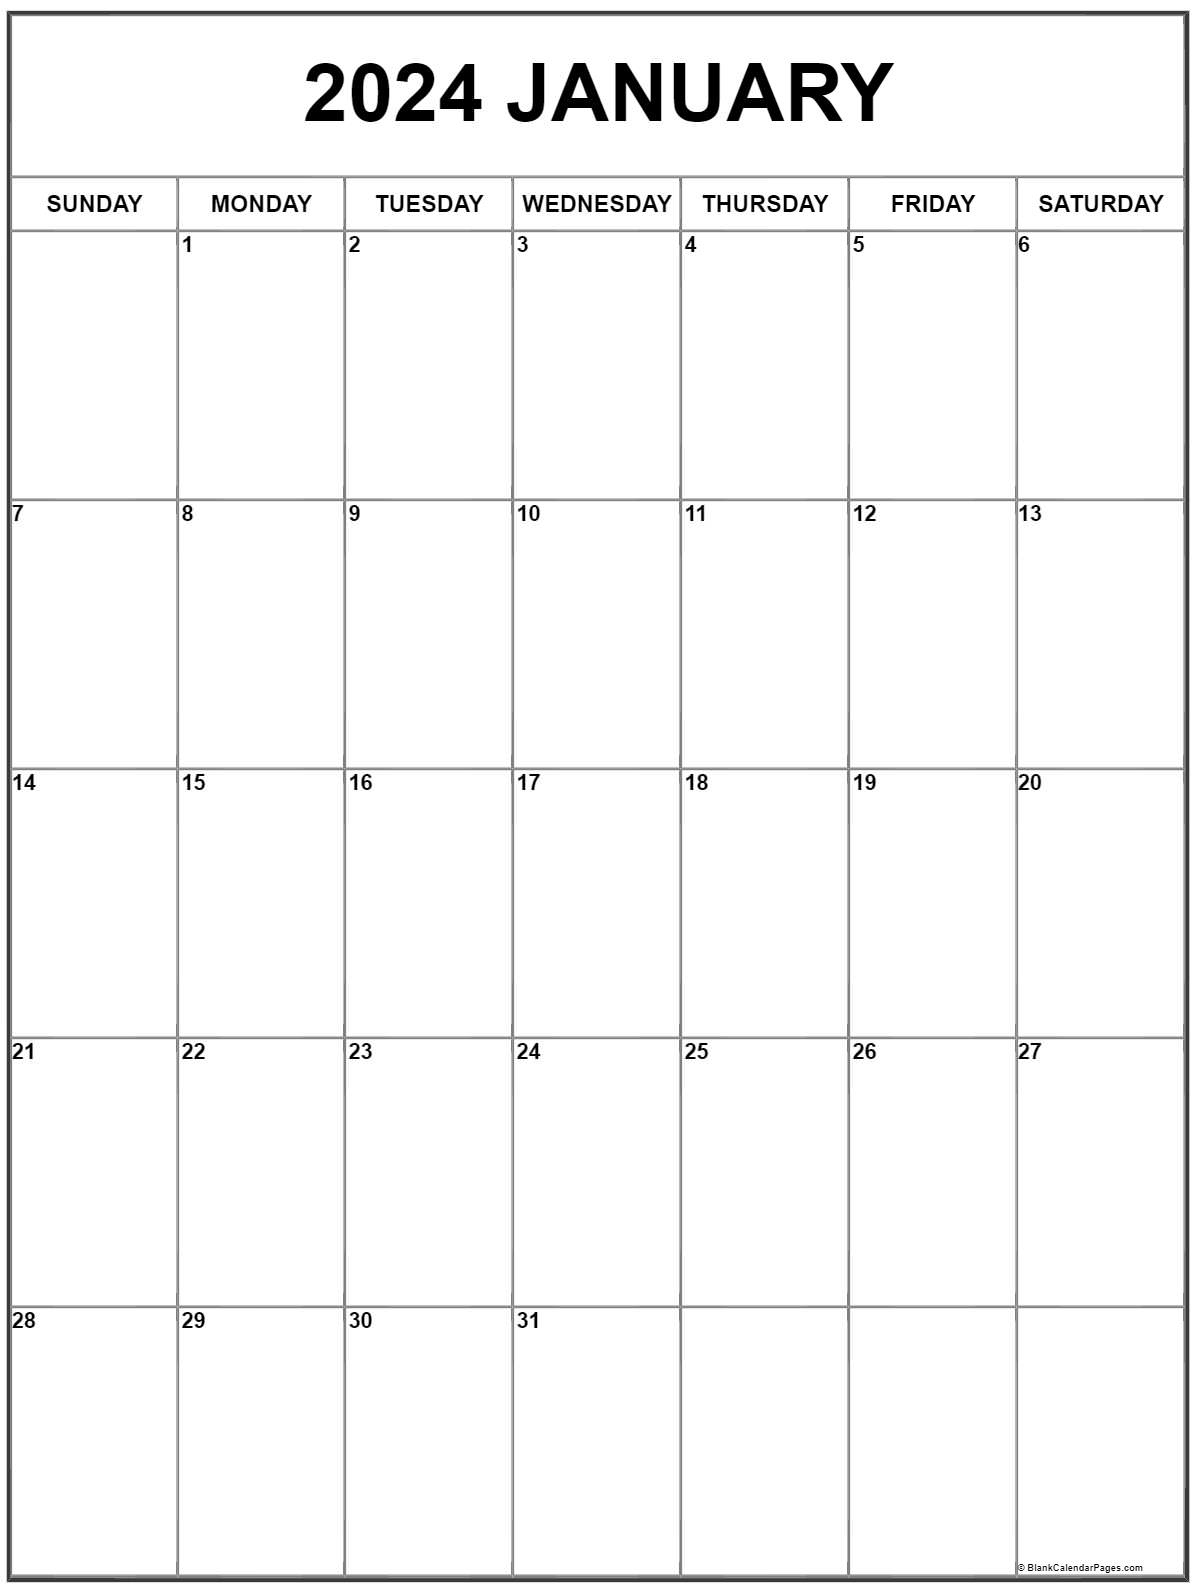 2024 Printable Calendar By Month Vertical Lotti Rhianon - Free Printable 2024 Vertical Monthly Calendar With Holidays